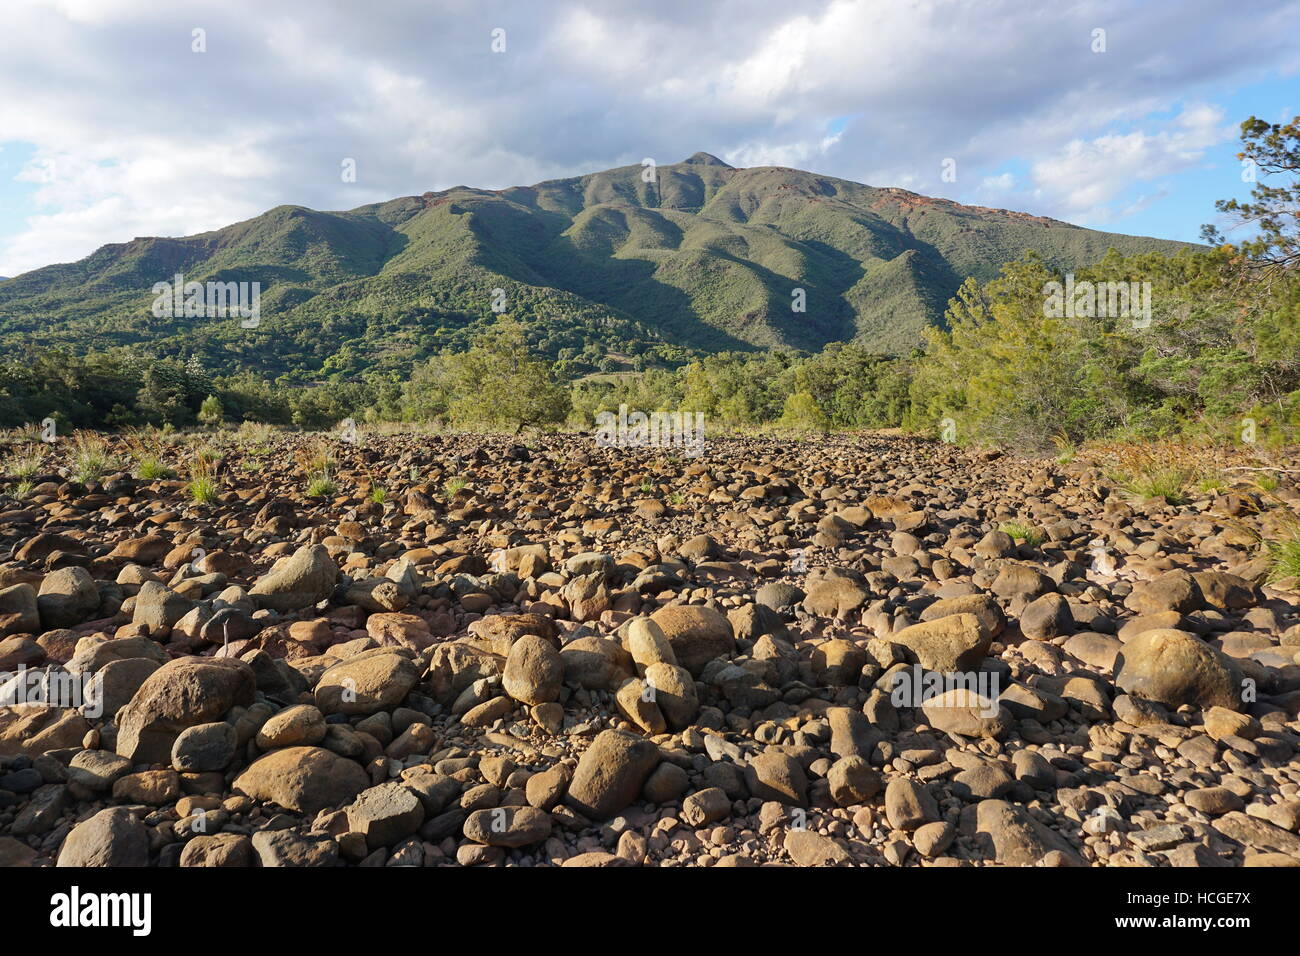 Dry riverbed with rocks and a mountain in background, New Caledonia, Dumbea river, Grande Terre island, south Pacific Stock Photo